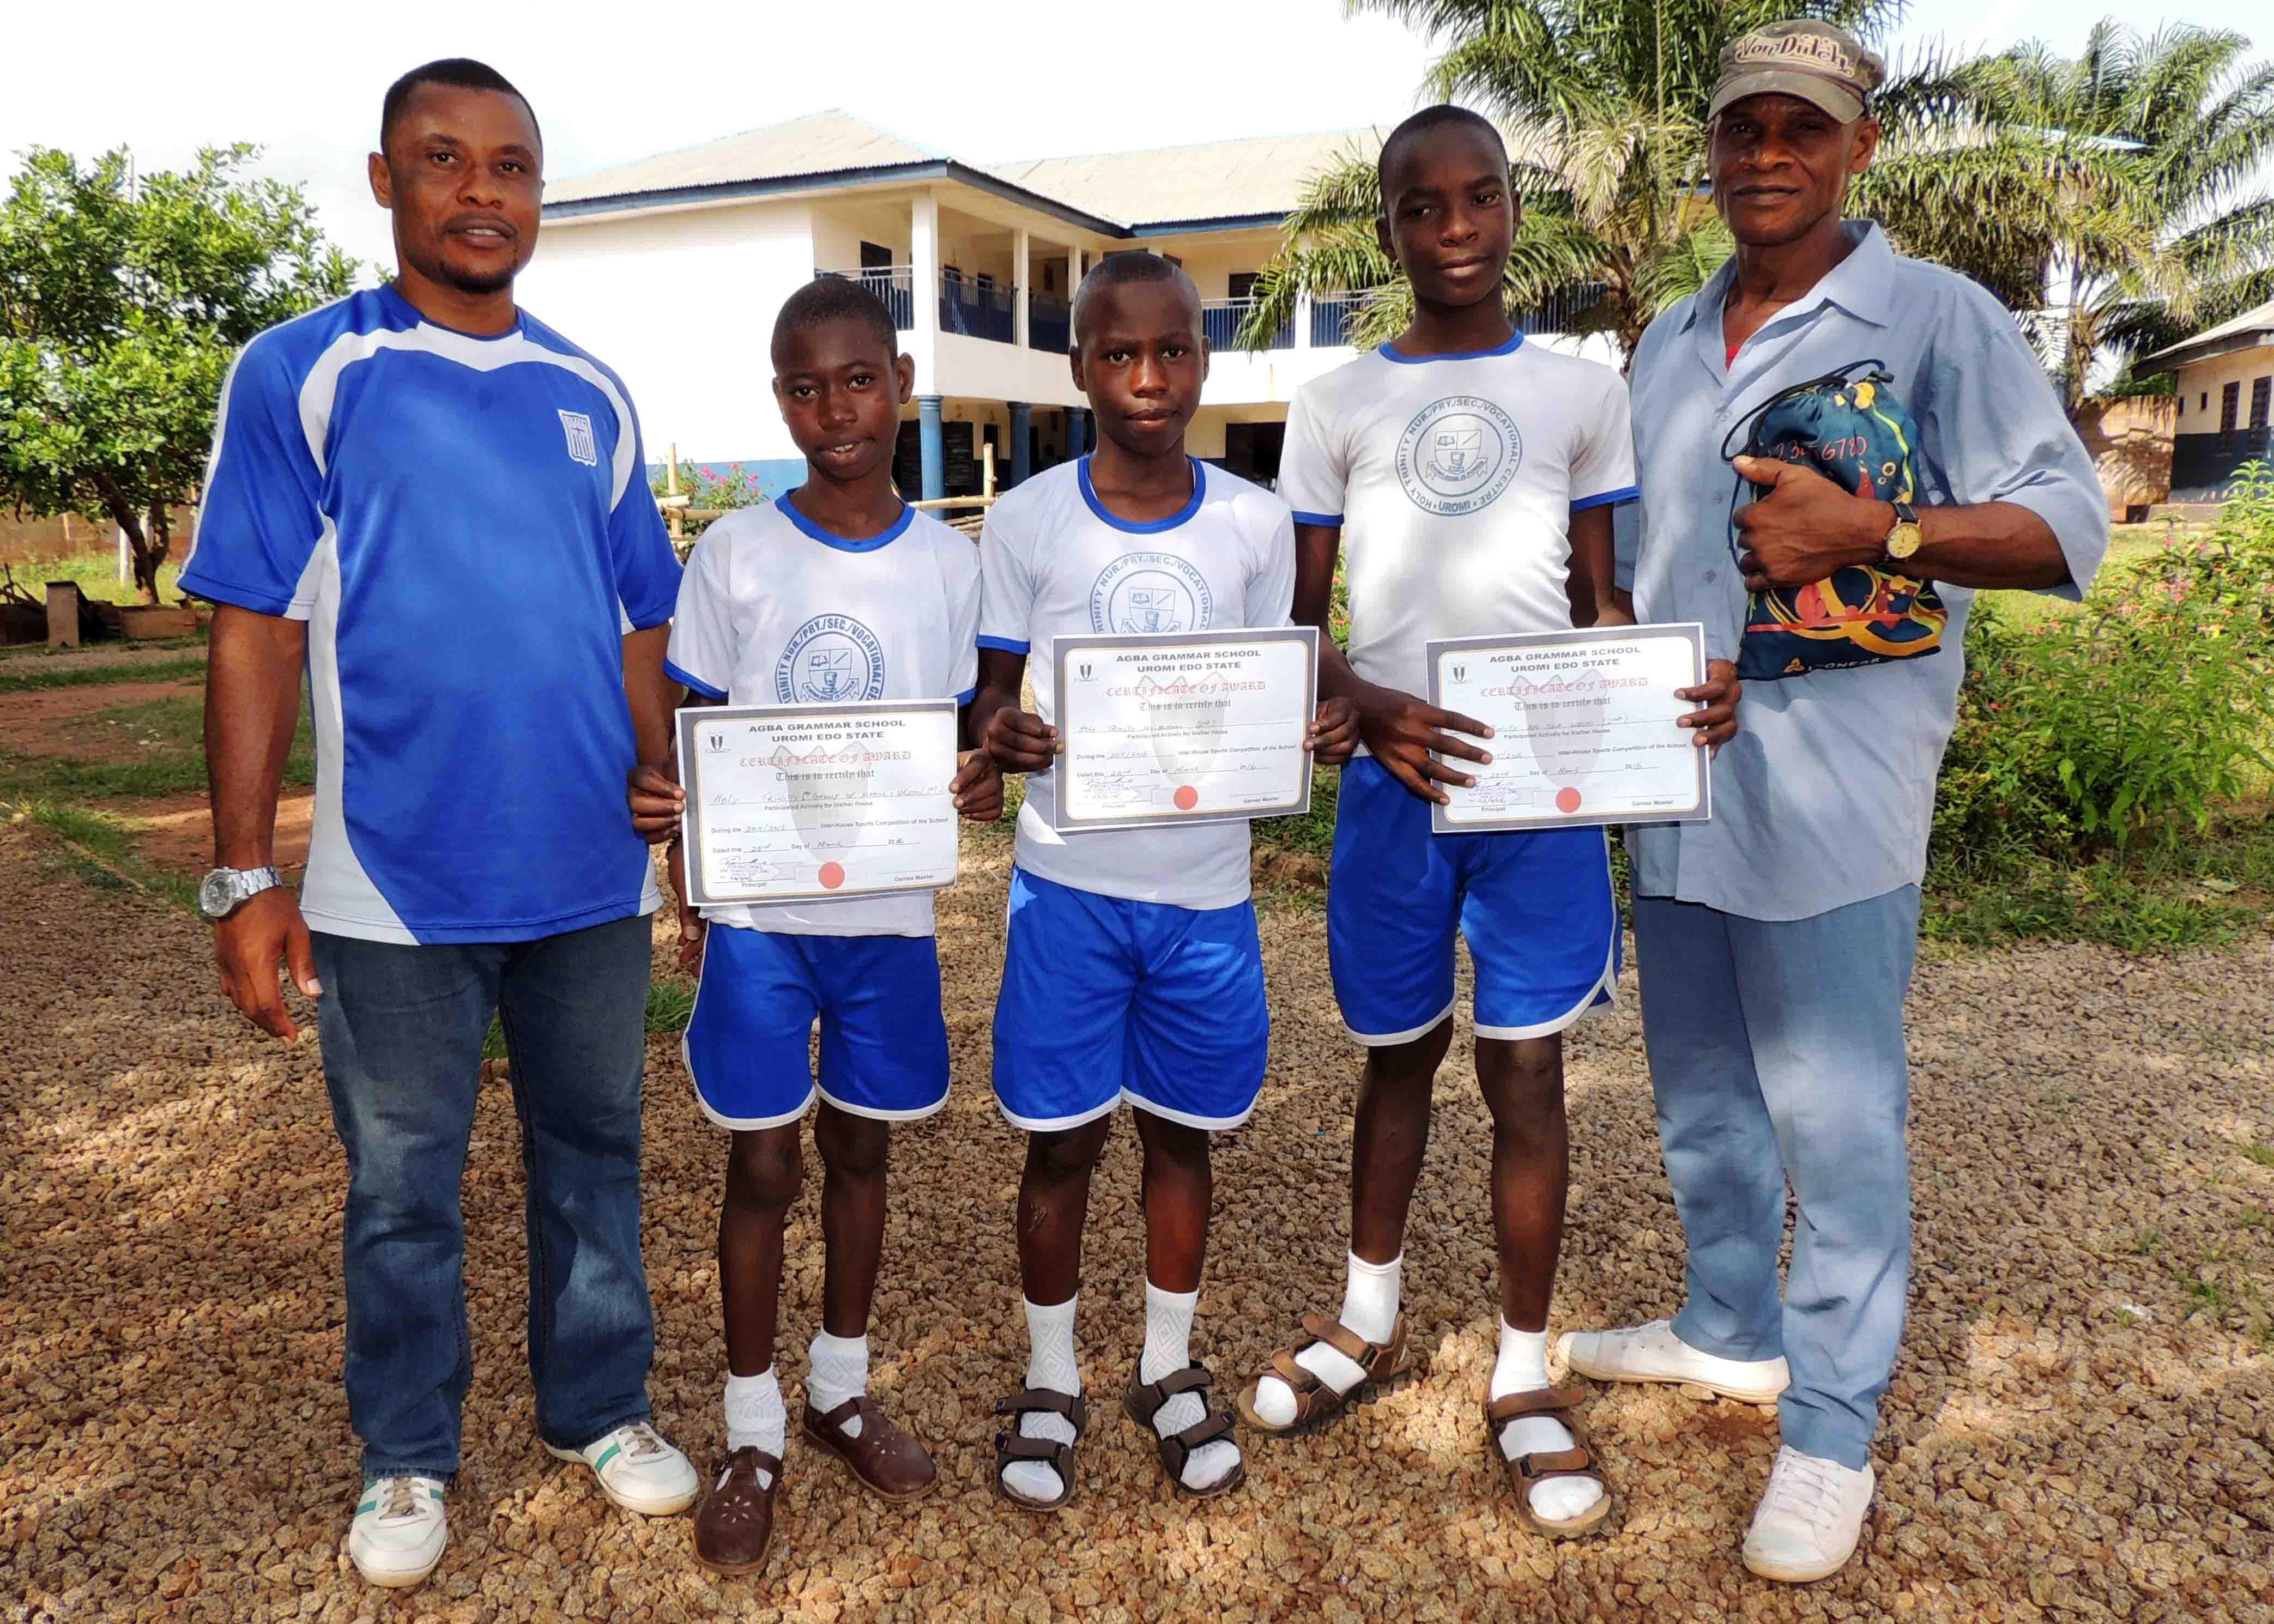 Tremendous sporting successes at the Holy Trinity School in Uromi